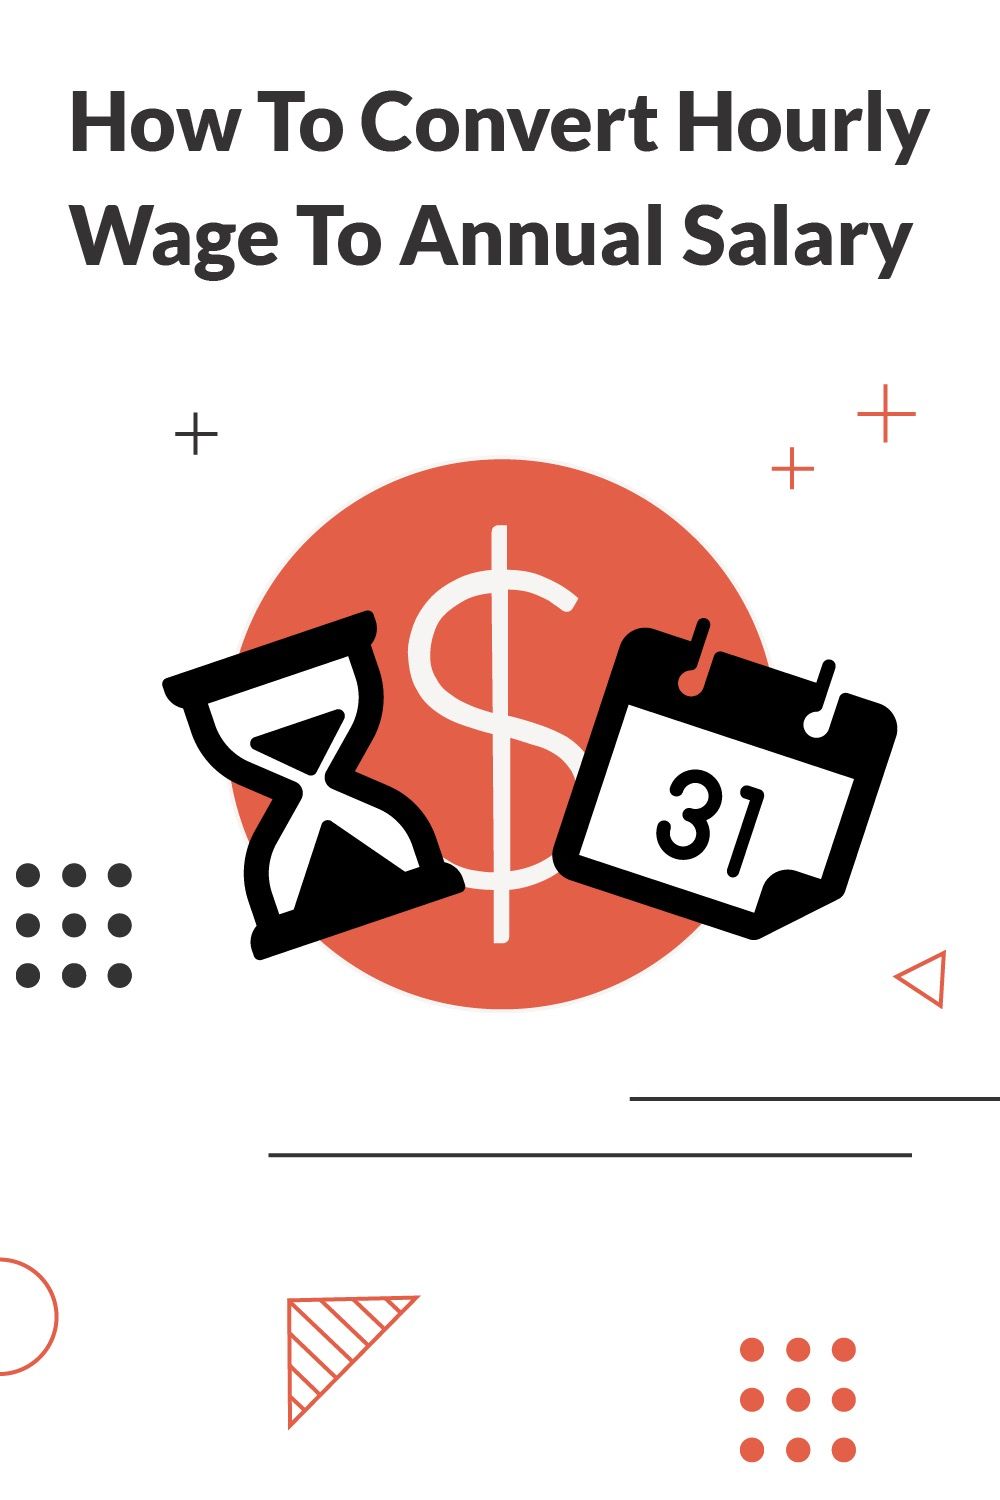 How To Convert Hourly Wage To Annual Salary Pinterest Image